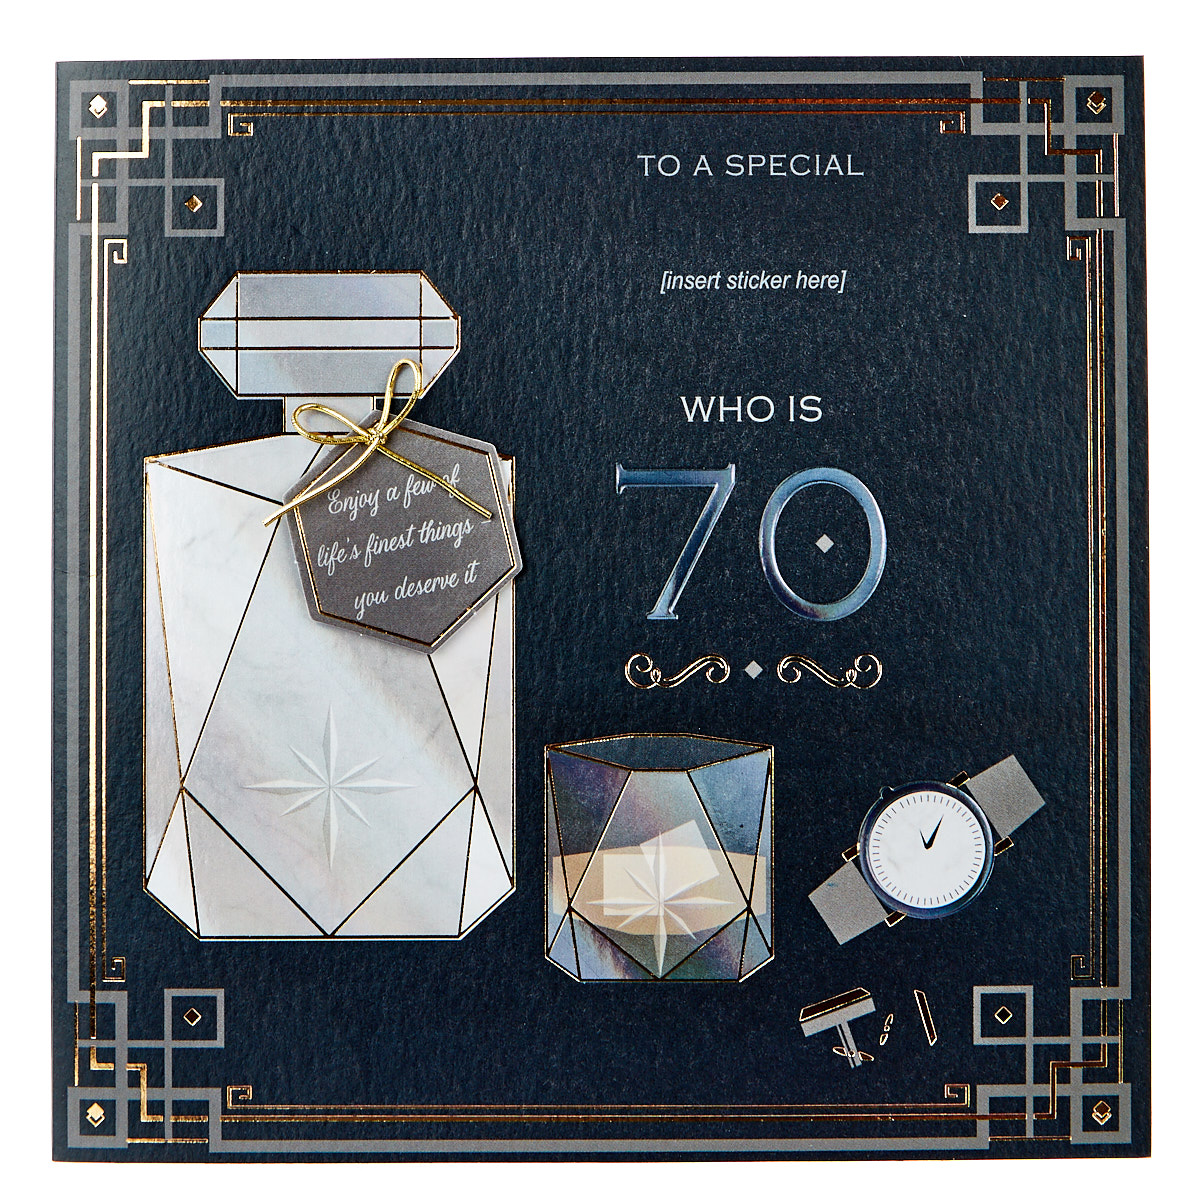 Exquisite Collection 70th Birthday Card - Any Male Recipient (Stickers Included)